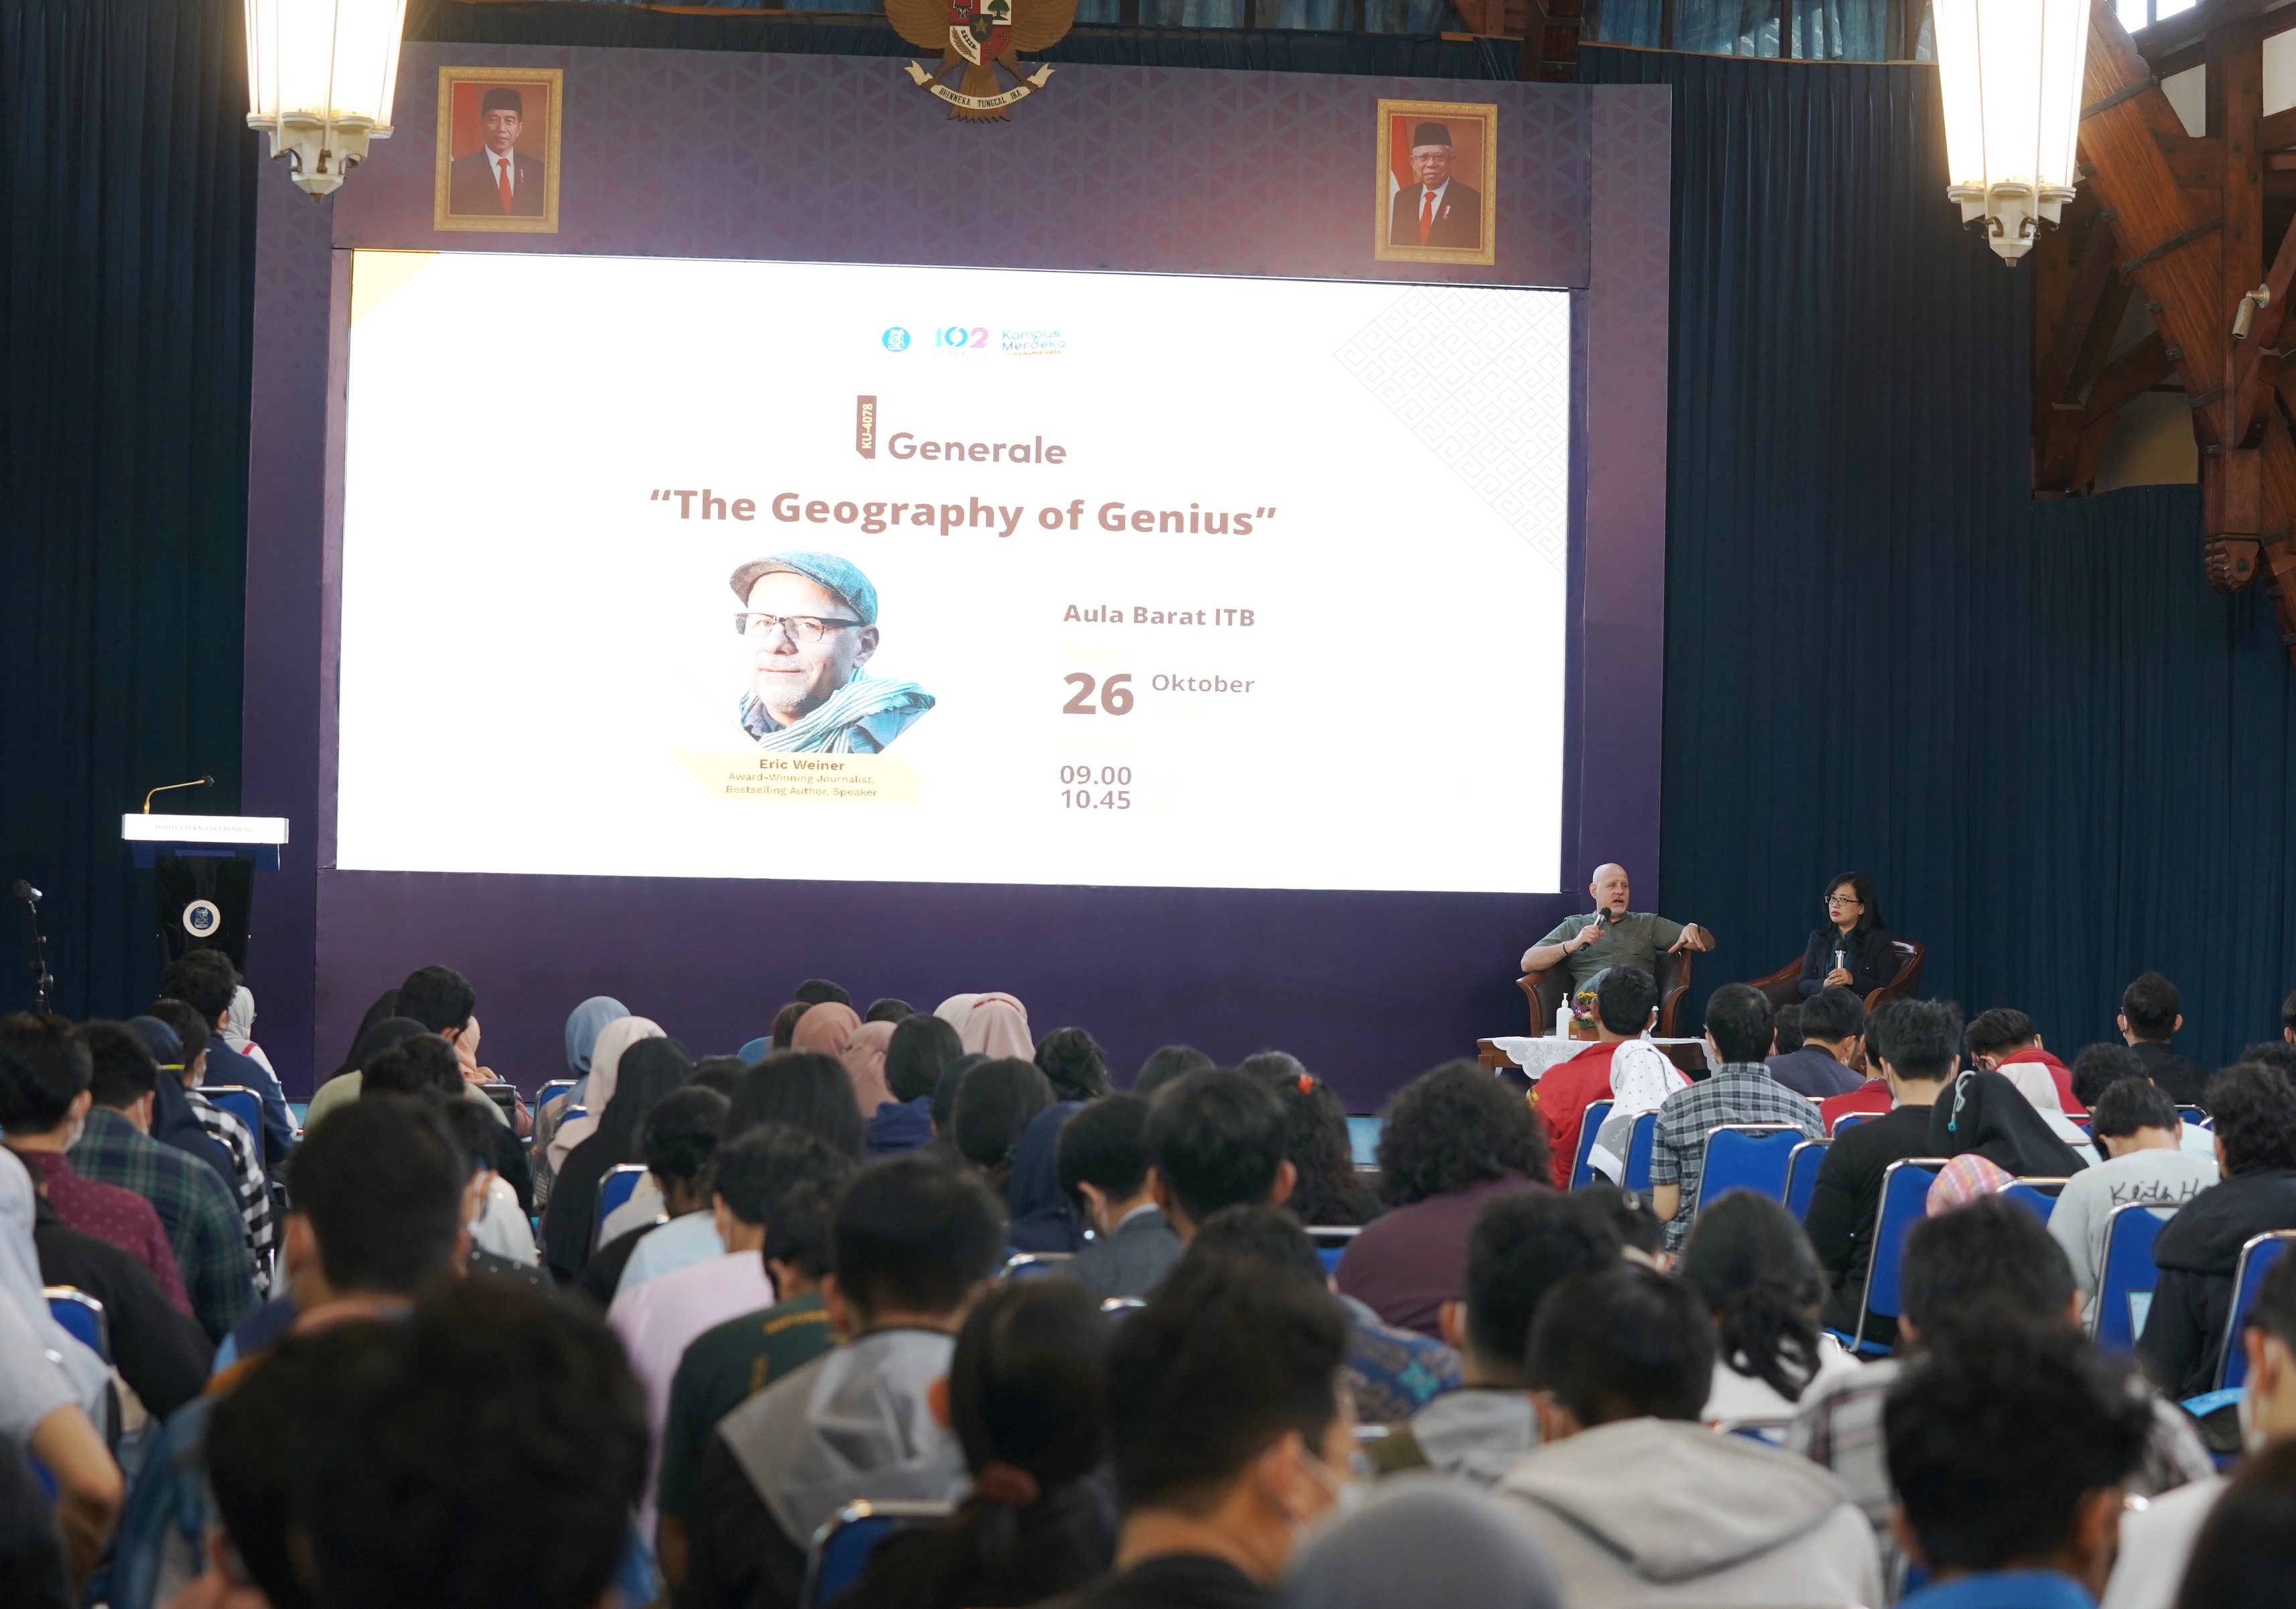 itb-studium-generale-understanding-the-real-meaning-behind-genius-through-the-book-geography-of-genius